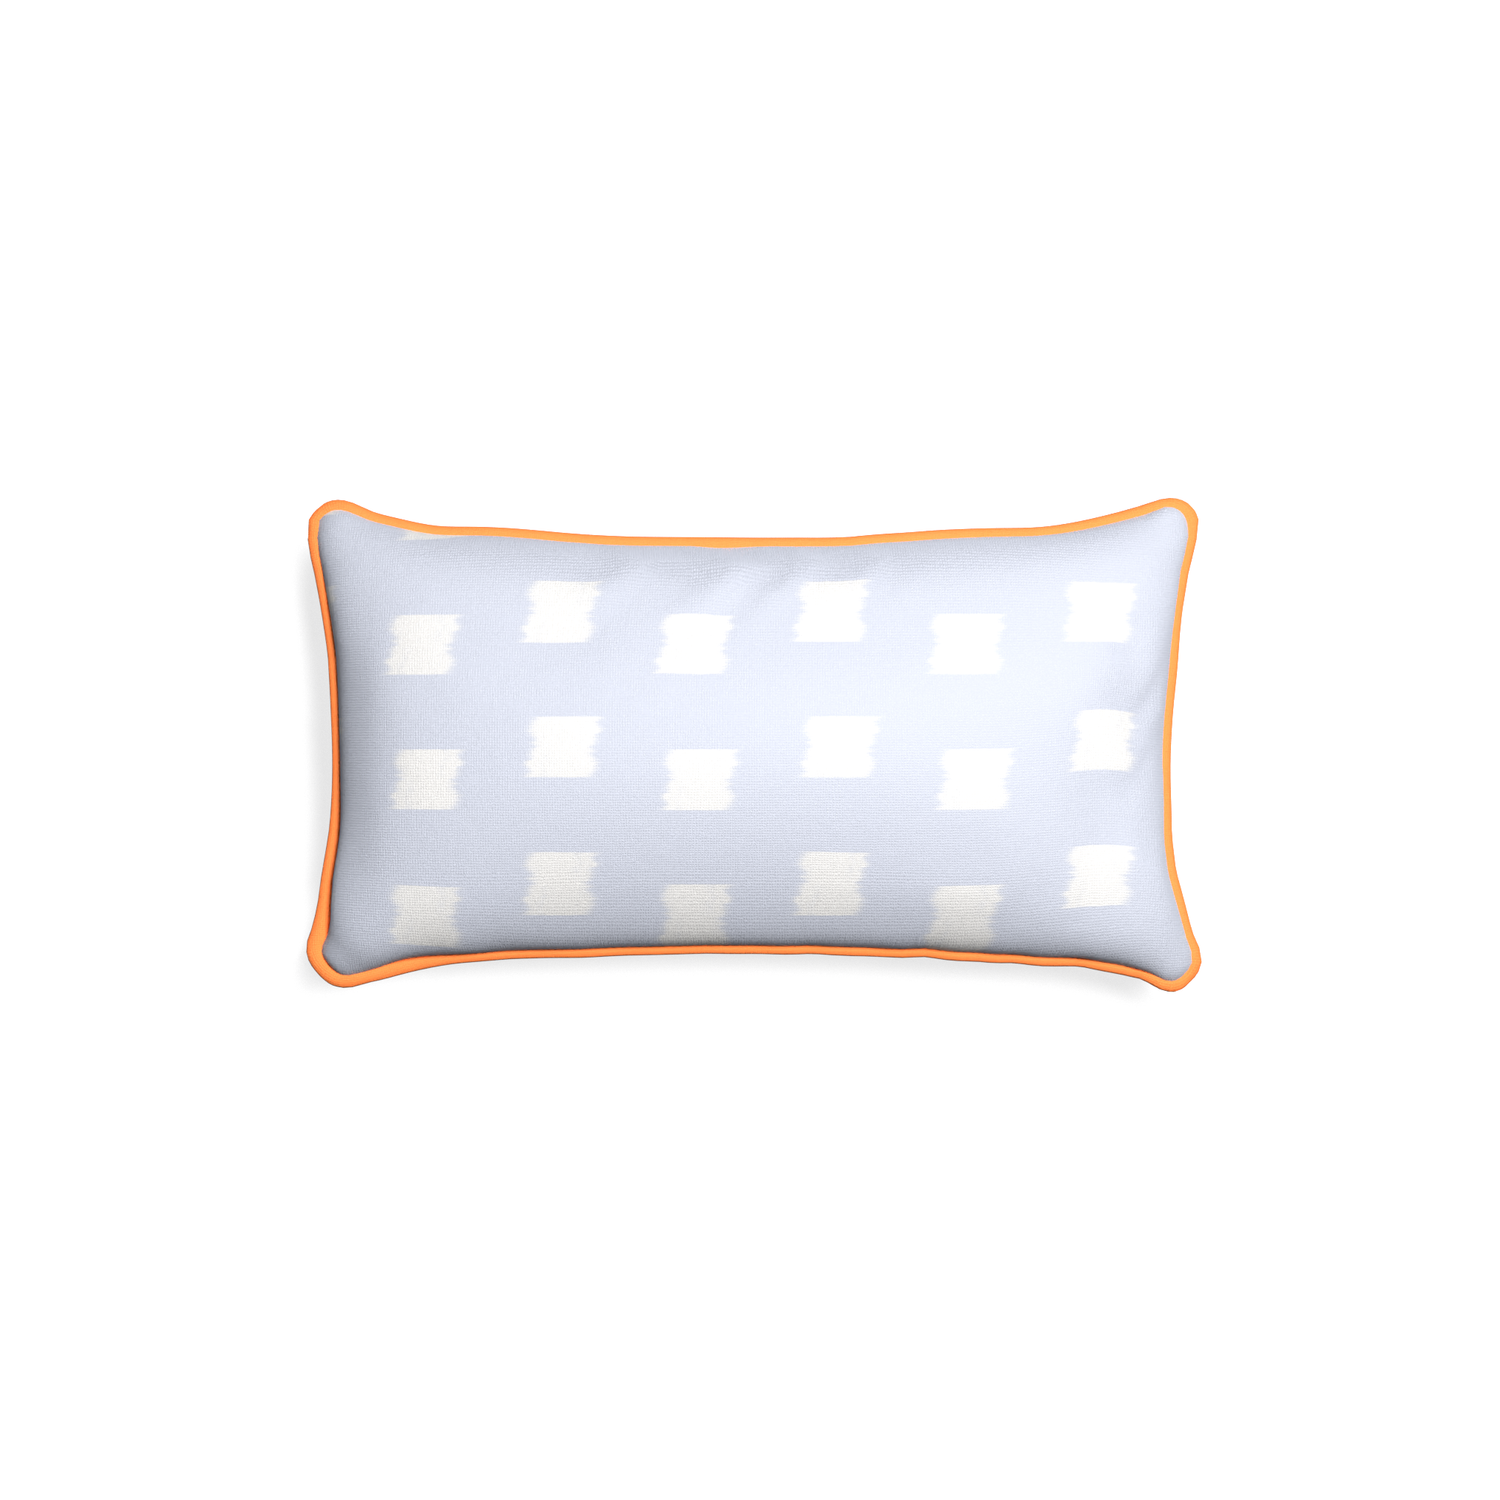 Petite-lumbar denton custom sky blue patternpillow with clementine piping on white background